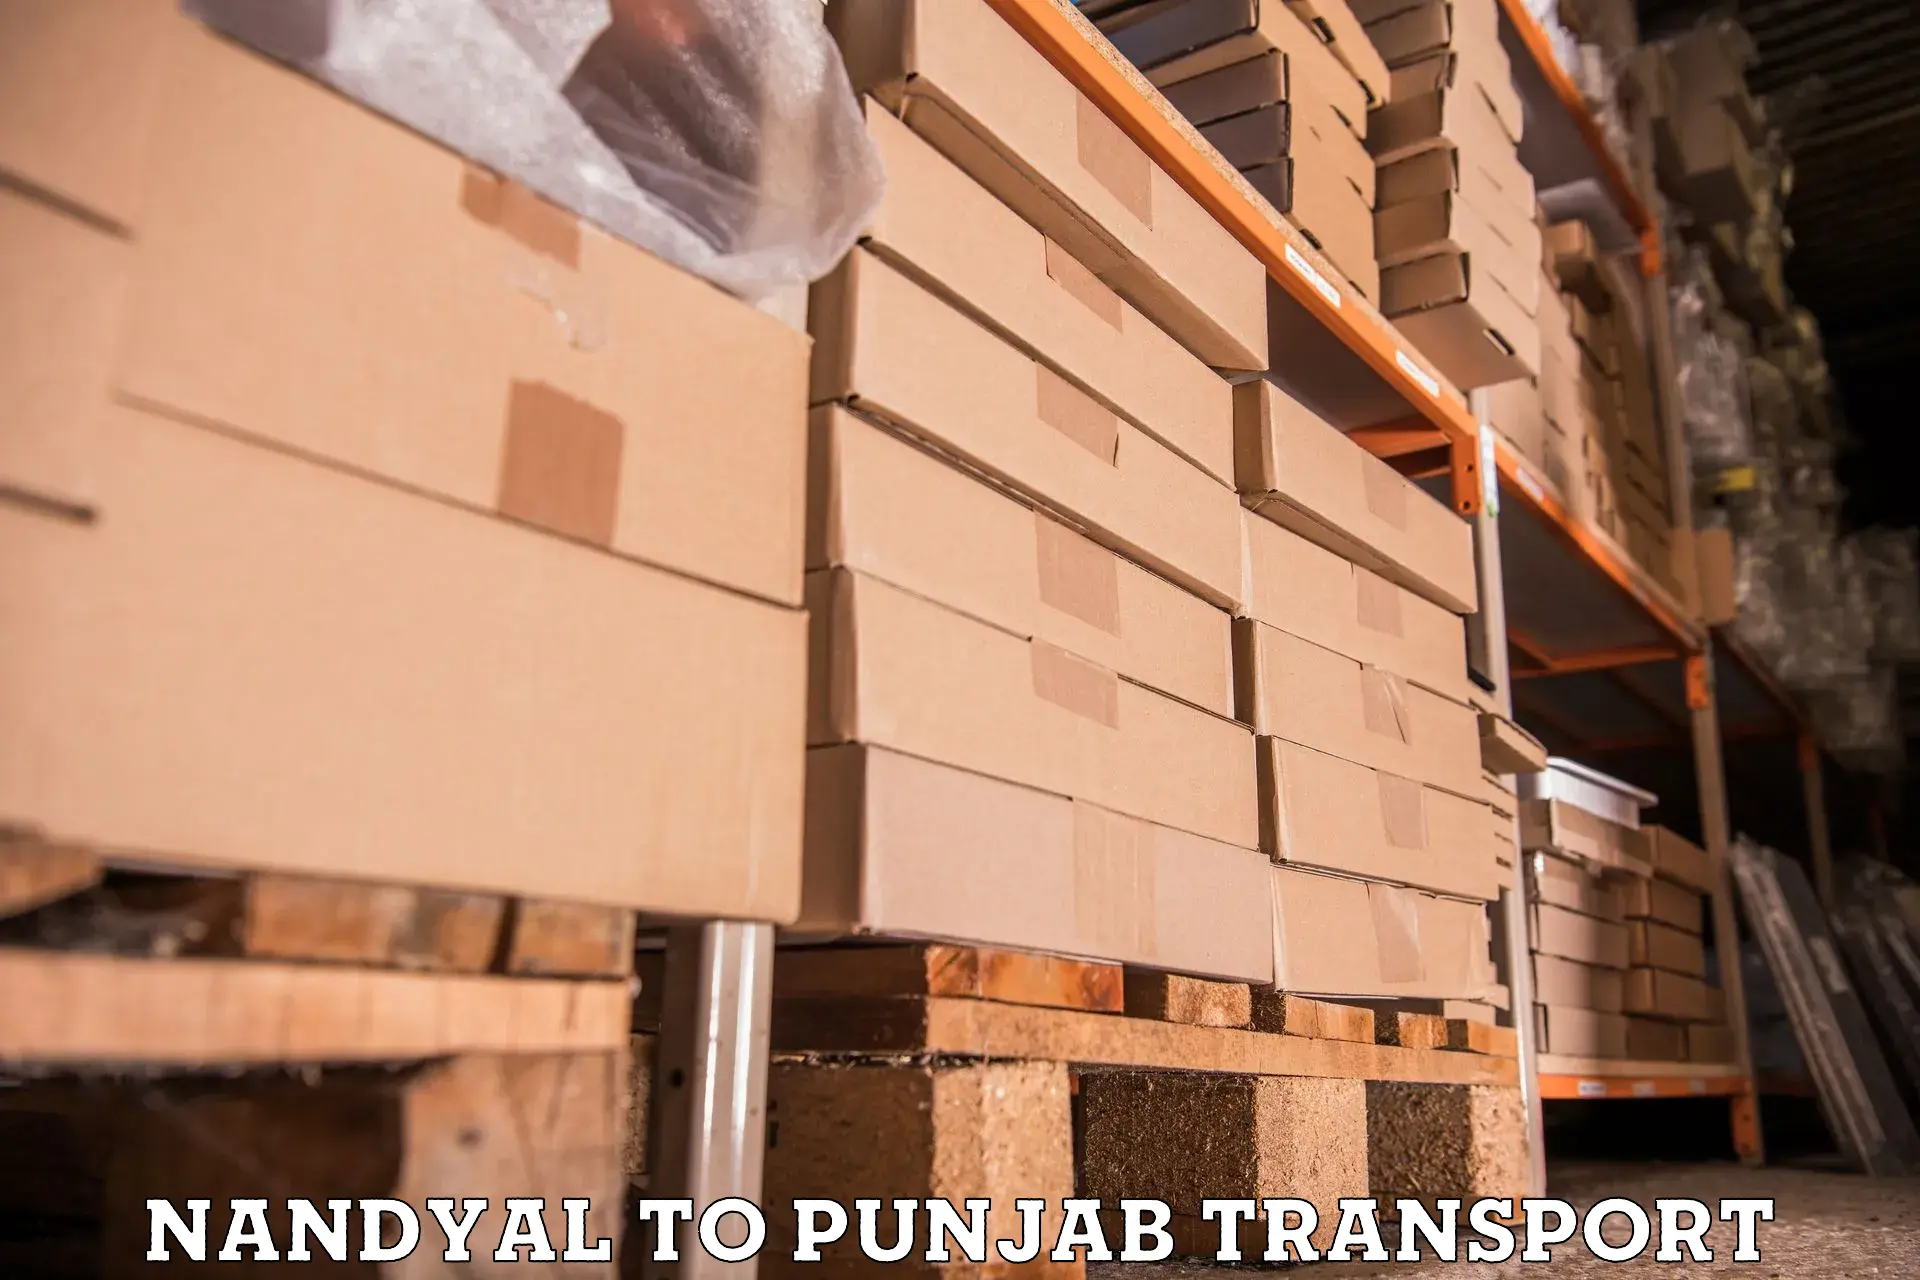 Container transport service Nandyal to Beas